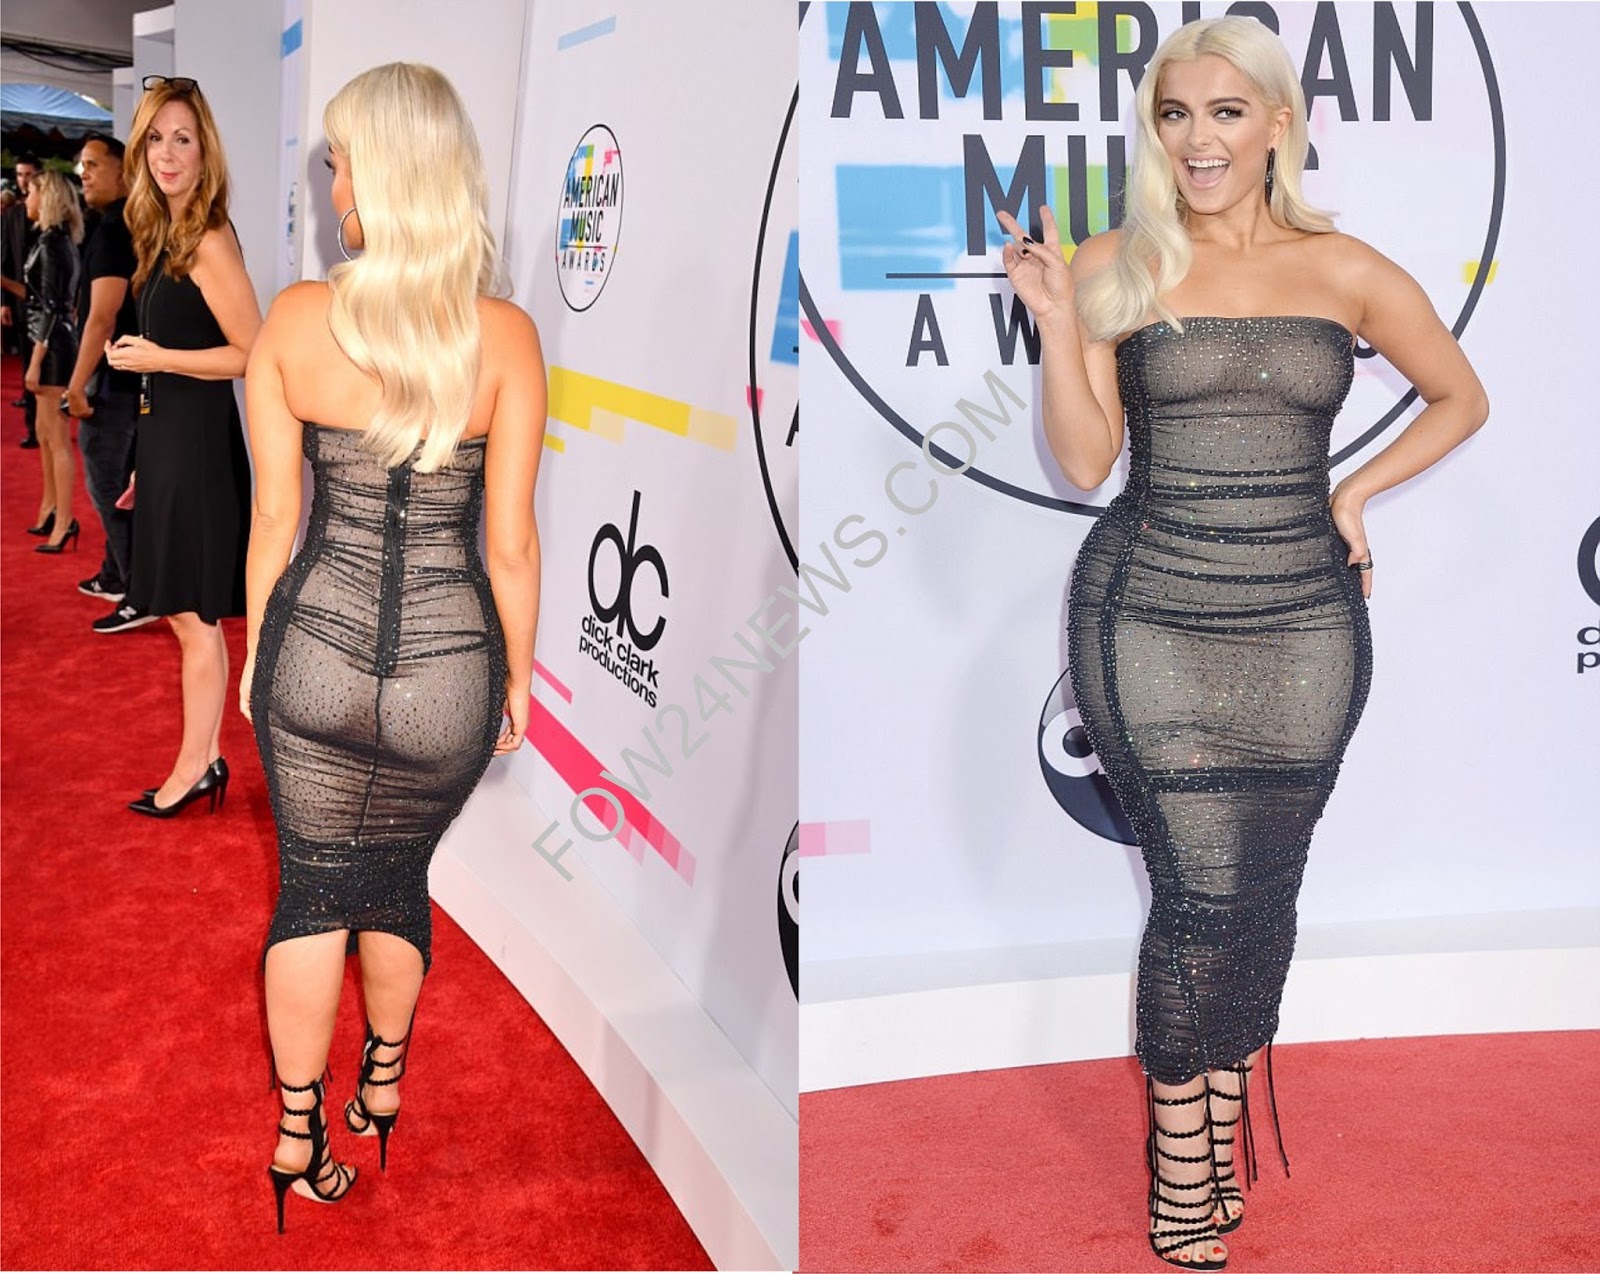 Bebe Rexha Looks Nearly Nude In See-Through Black Dress.